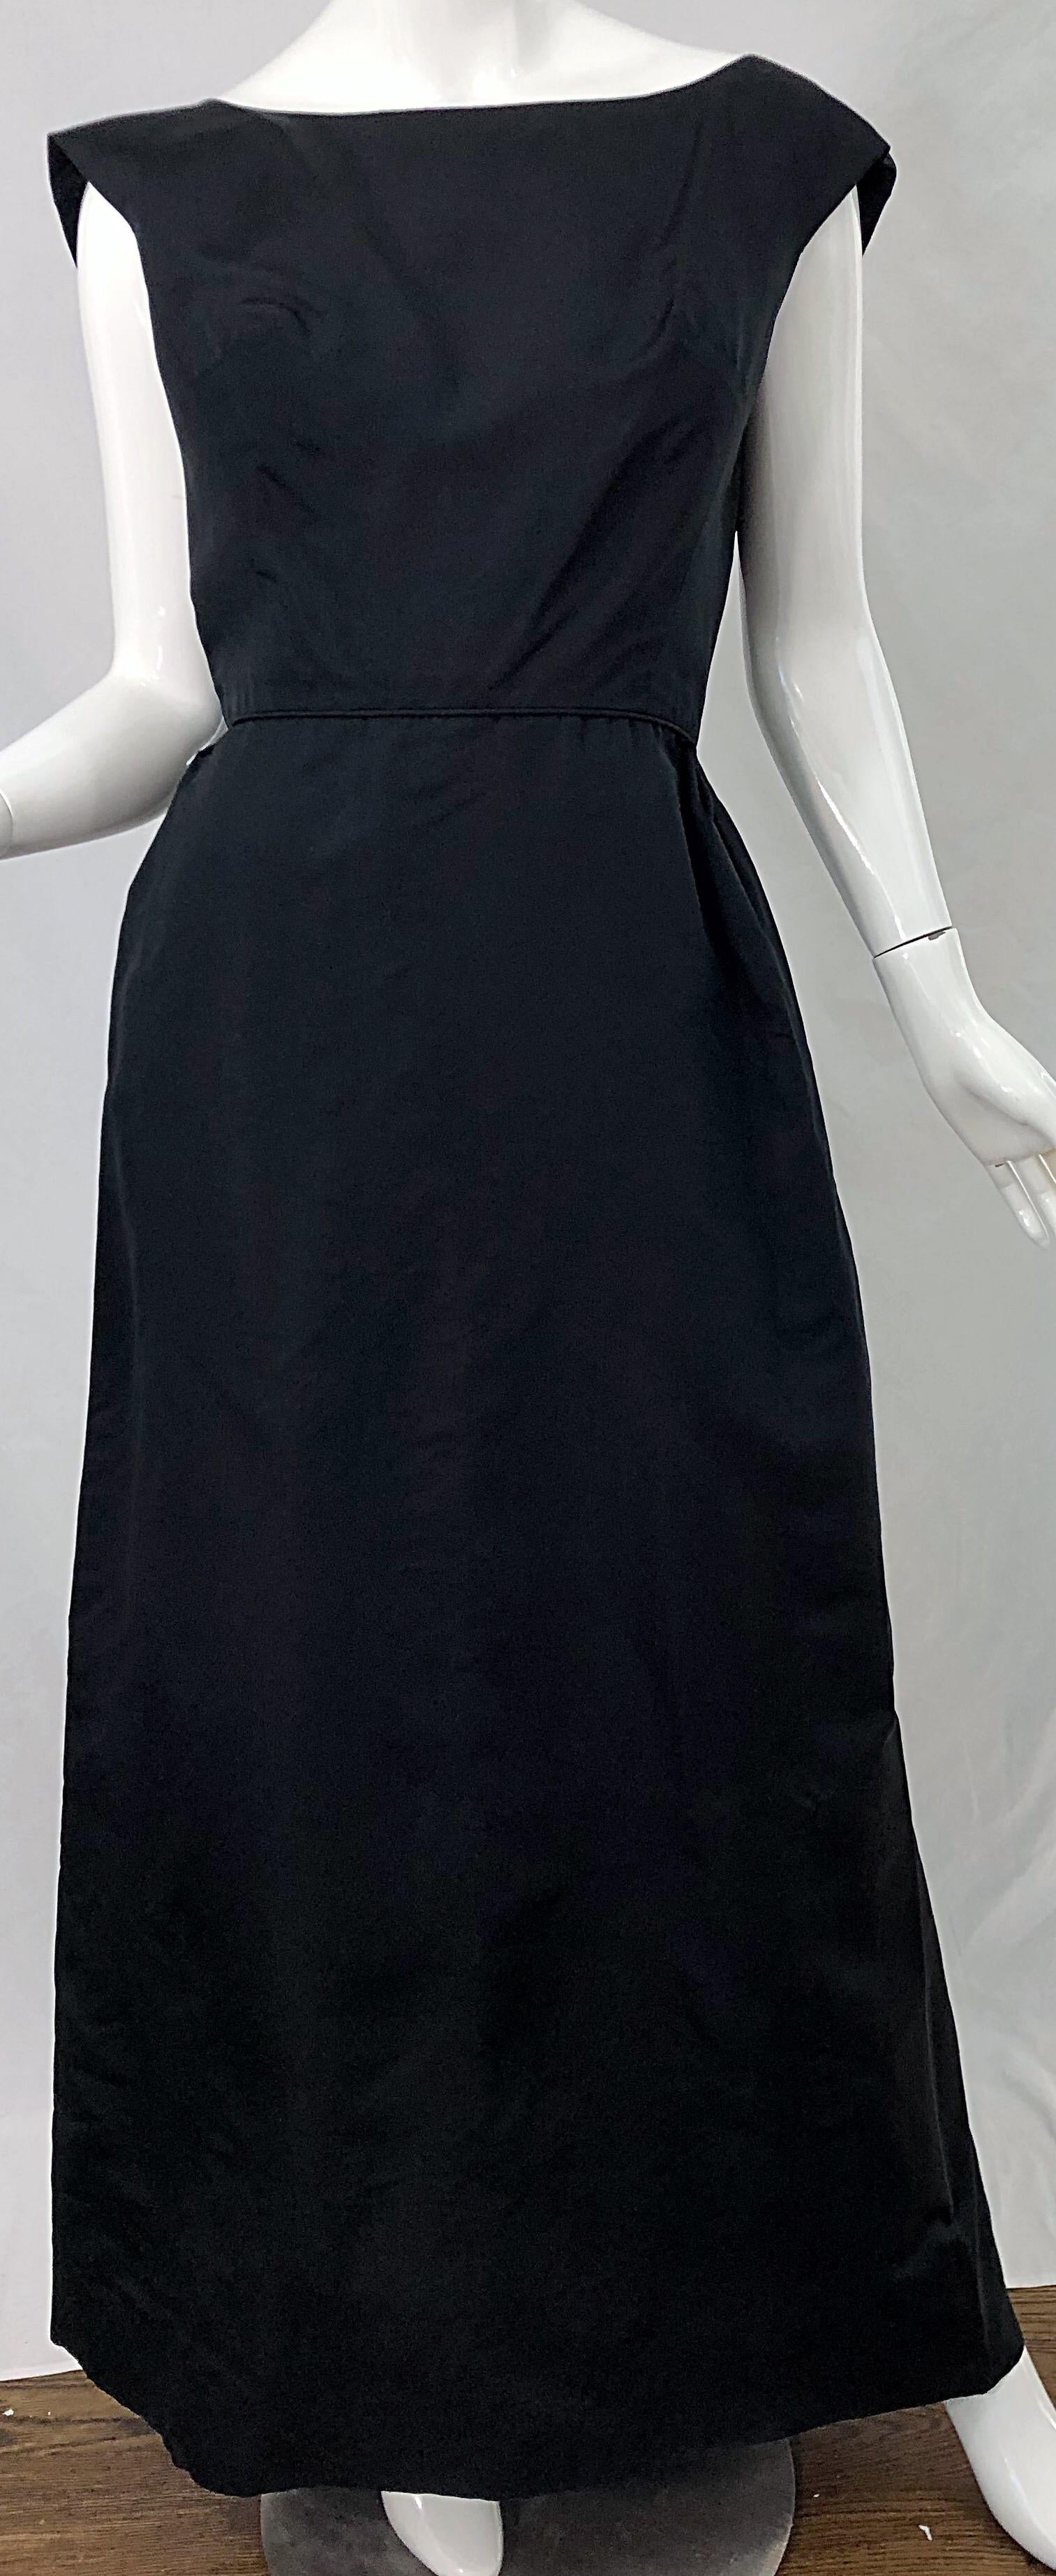 Beautiful and classic PAULINE TRIGERE black silk taffeta gown / evening dress ! Features a tailored bodice with a full skirt. Open back reveals just the right amount of skin, and has tuxedo style buttons and a hidden metal zipper. Has a slight train